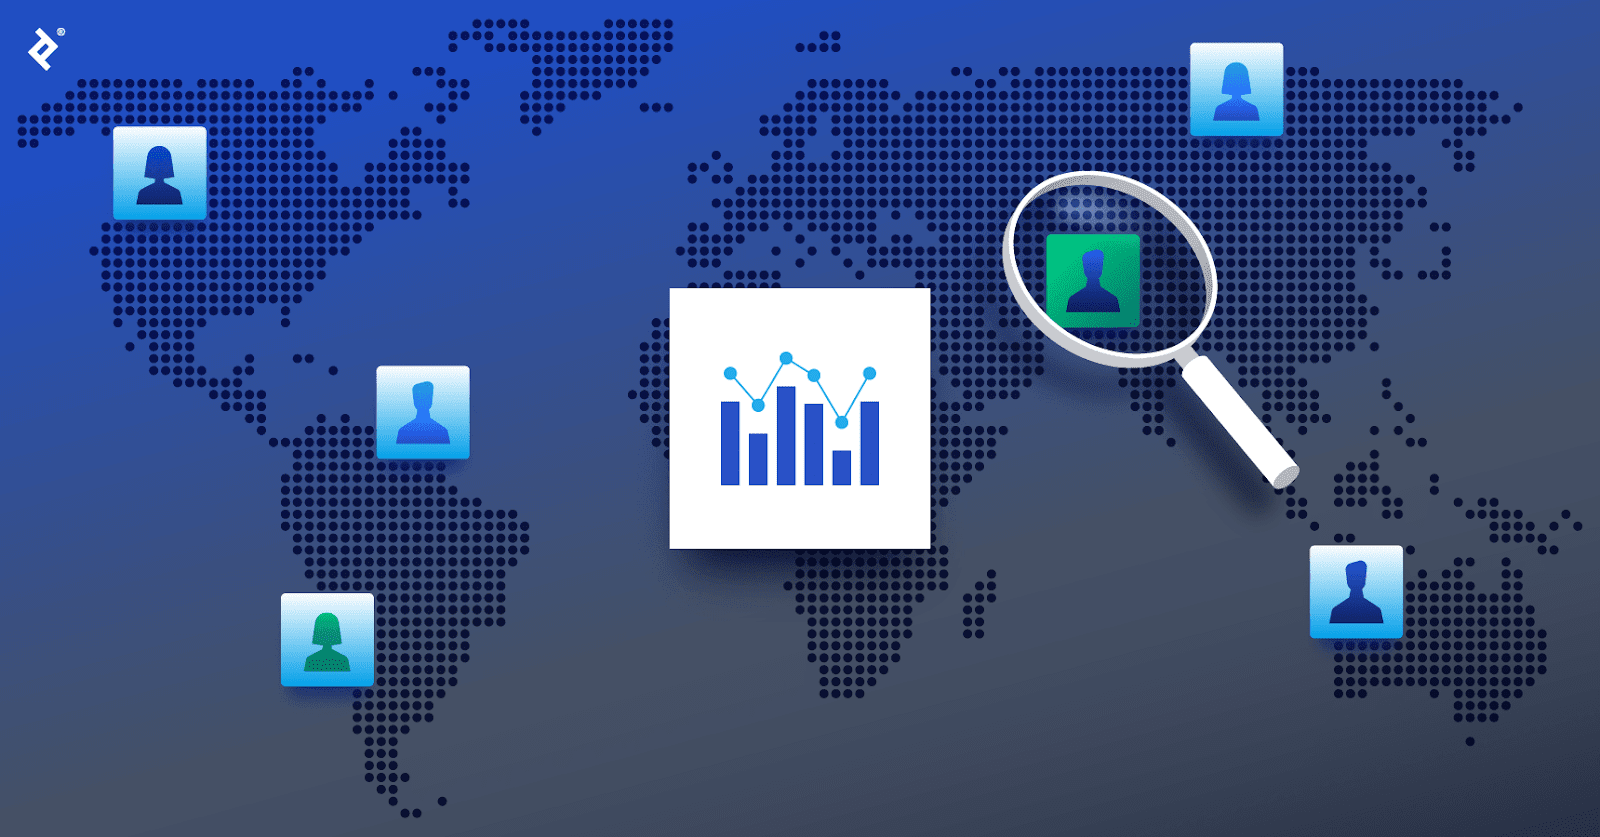 A line graph superimposed over a bar graph is shown in a box in front of a global map with blue client icons. A large magnifying glass highlights the green client icon.